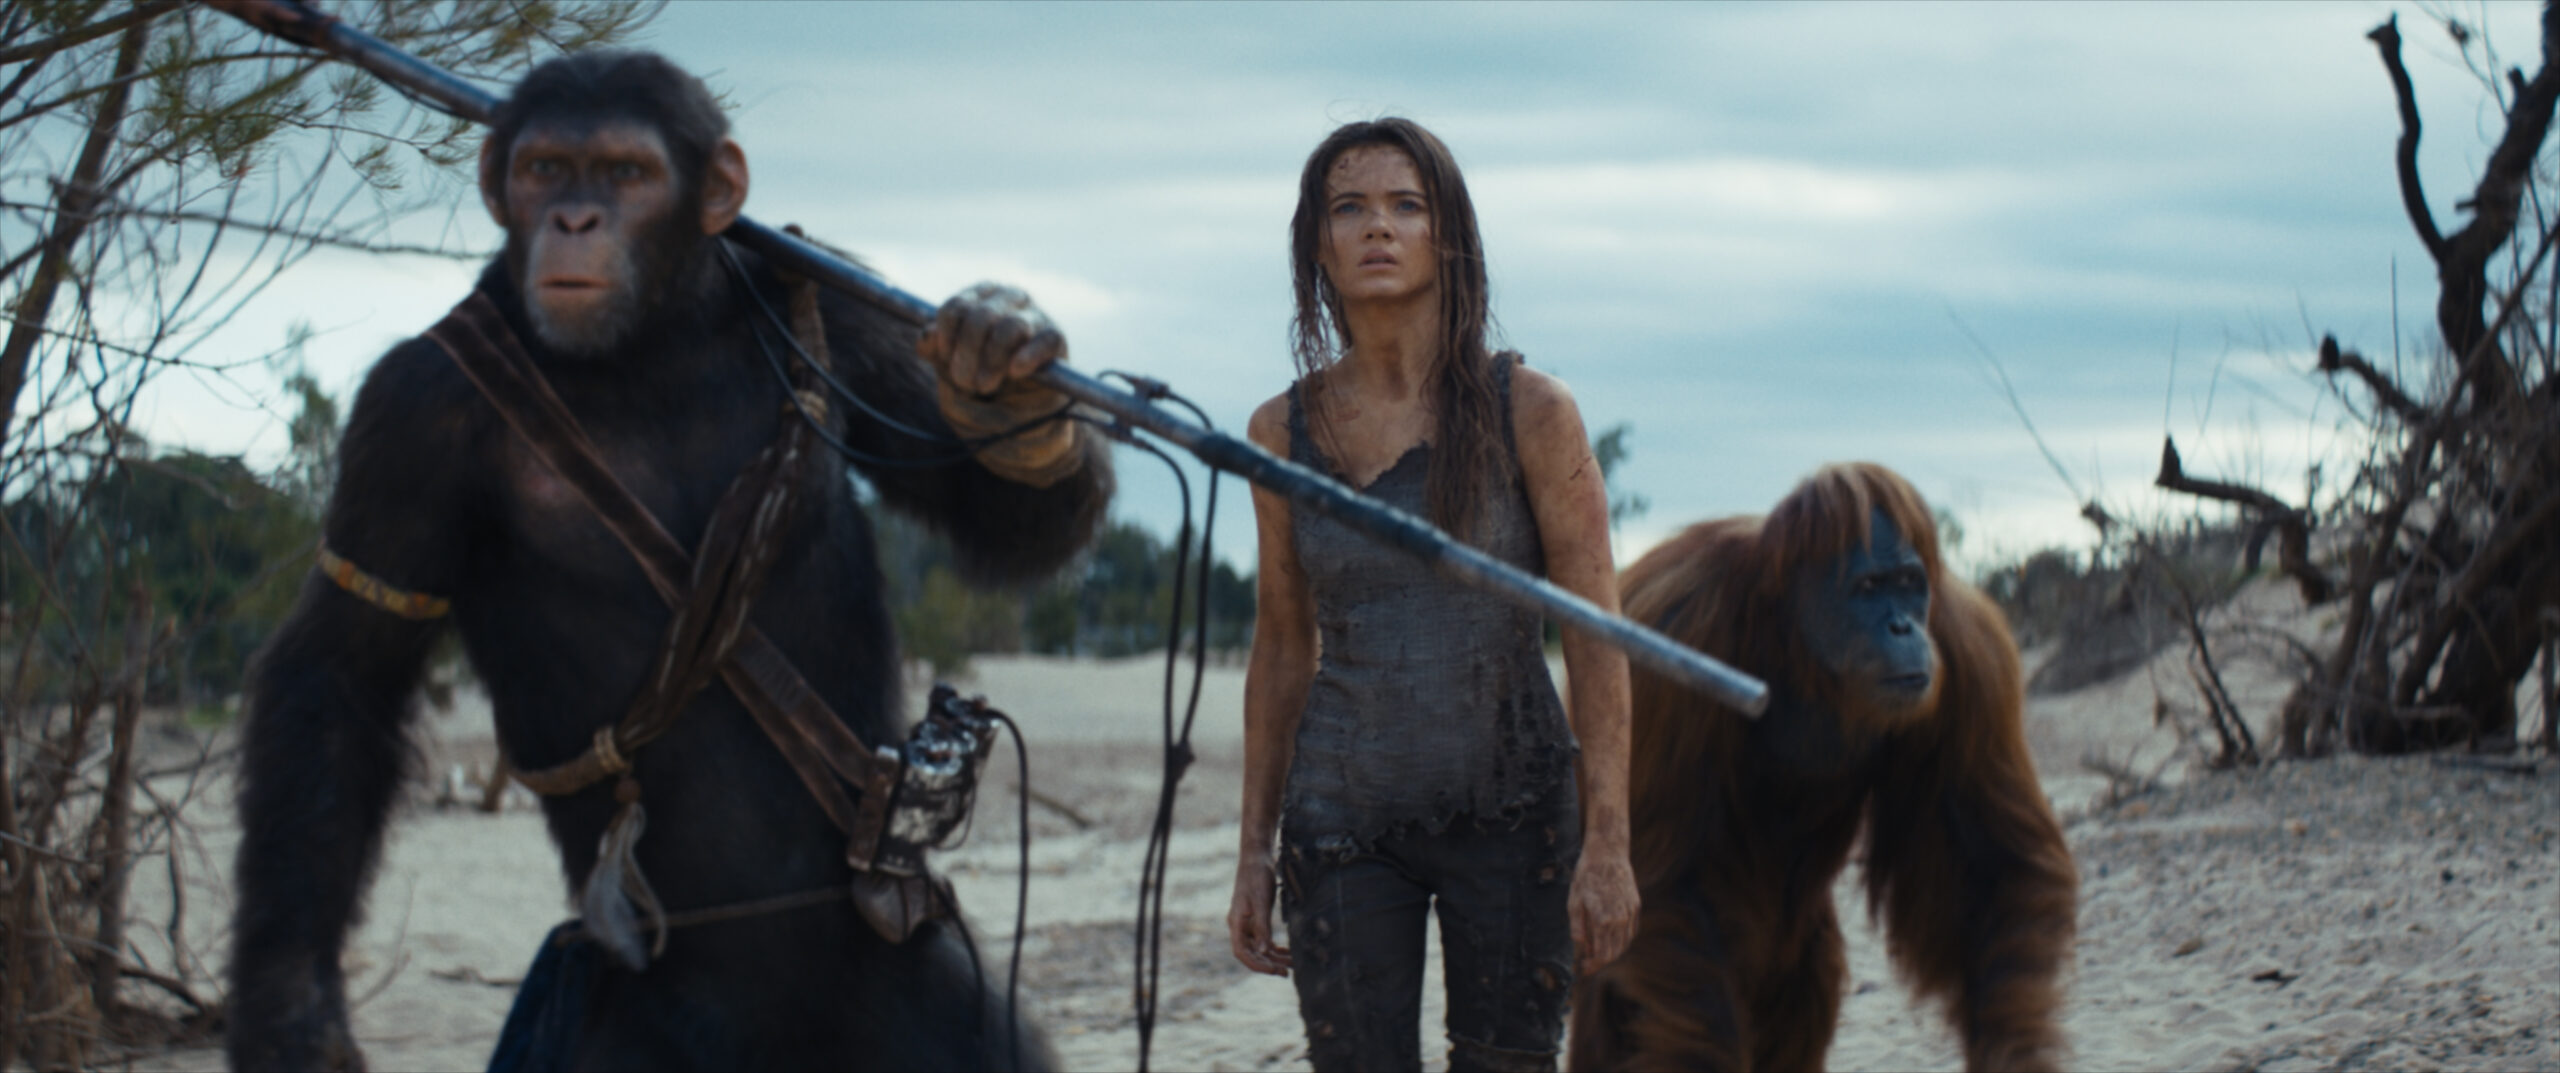 New Trailer Unveiled For ‘Kingdom of the Planet of the Apes’ During The Big Game